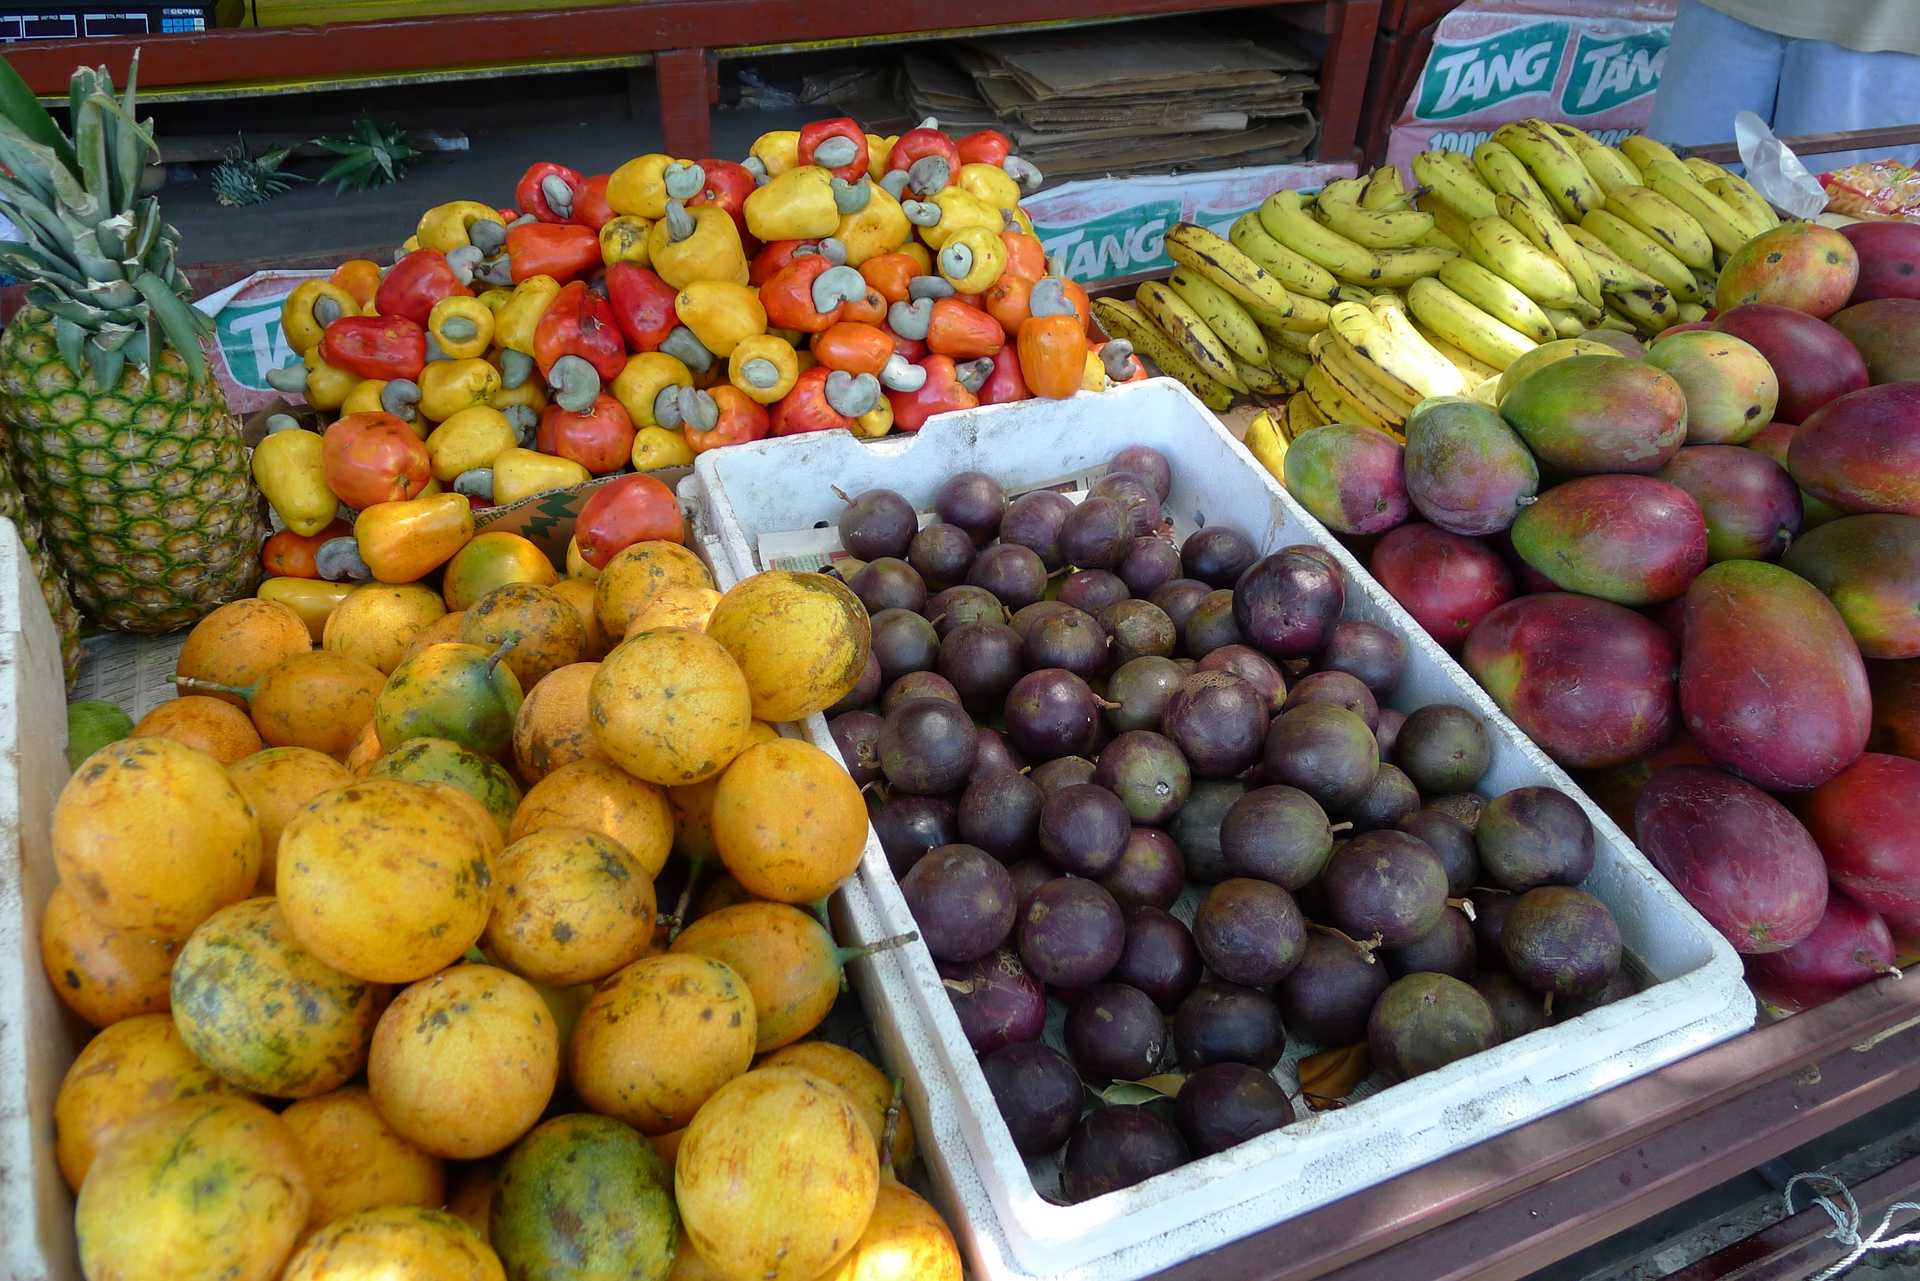 Baskets full of tropical fruits at a market